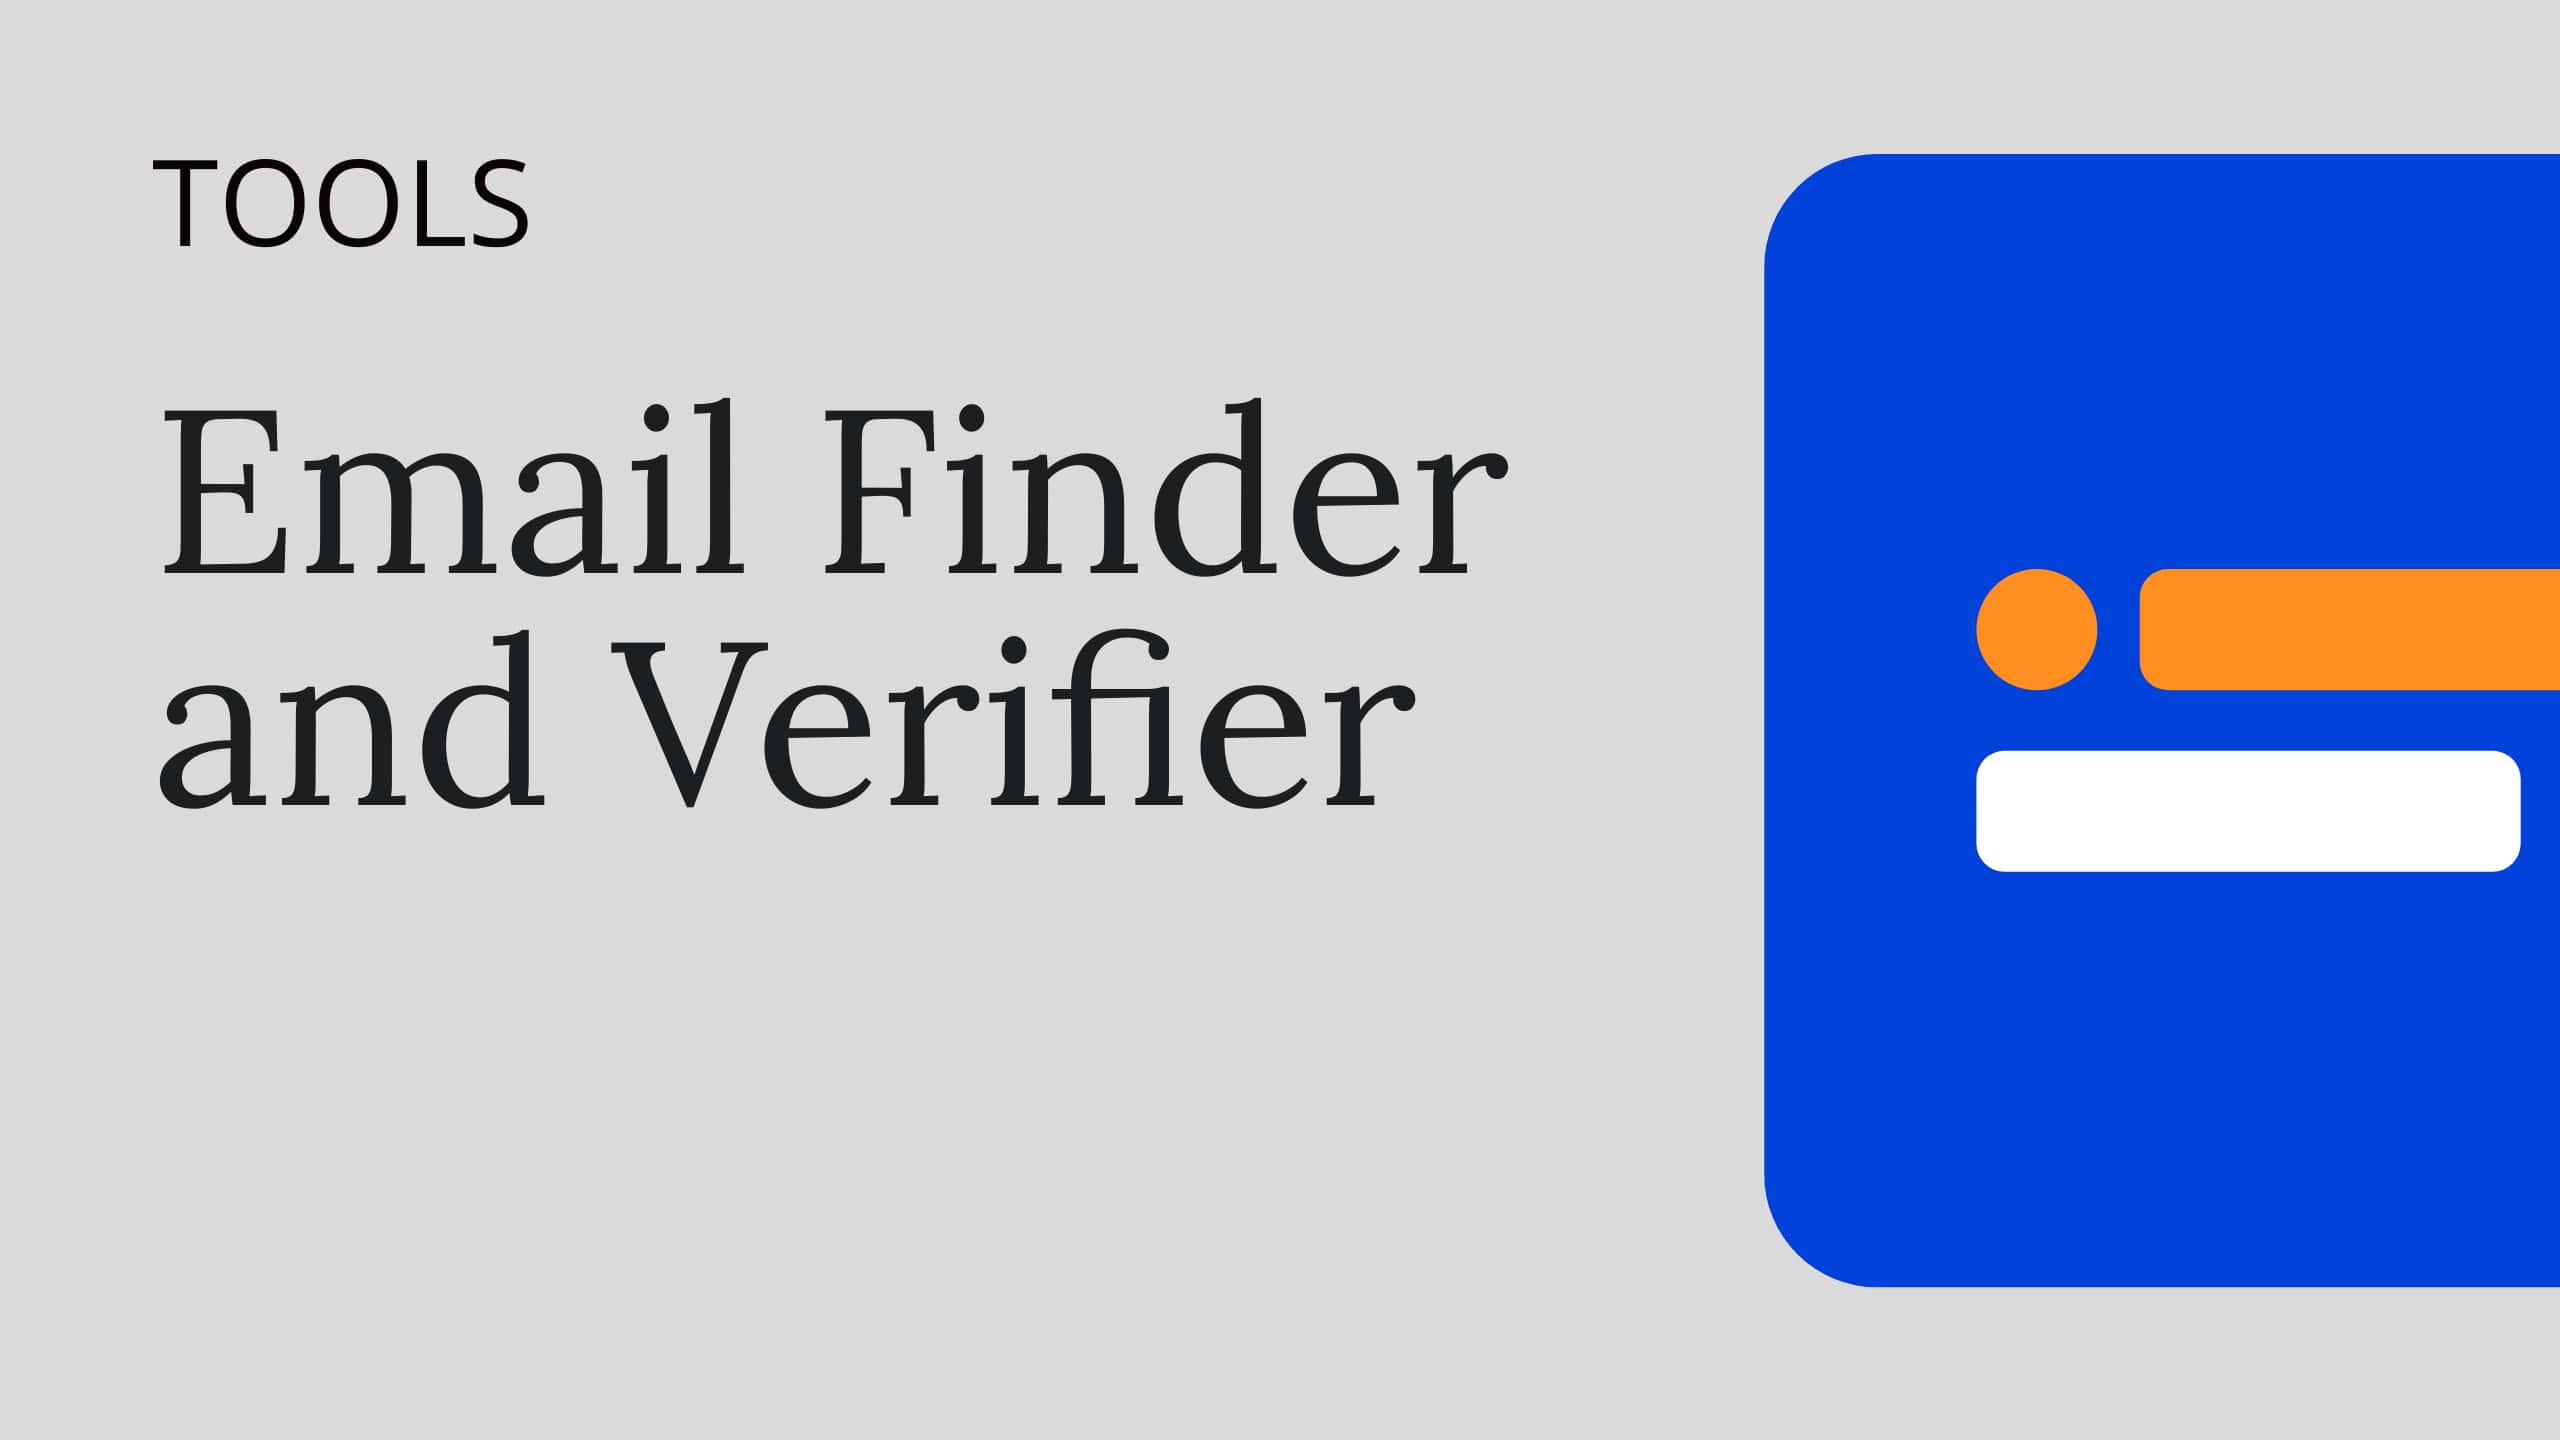 Email Finder and Verifier